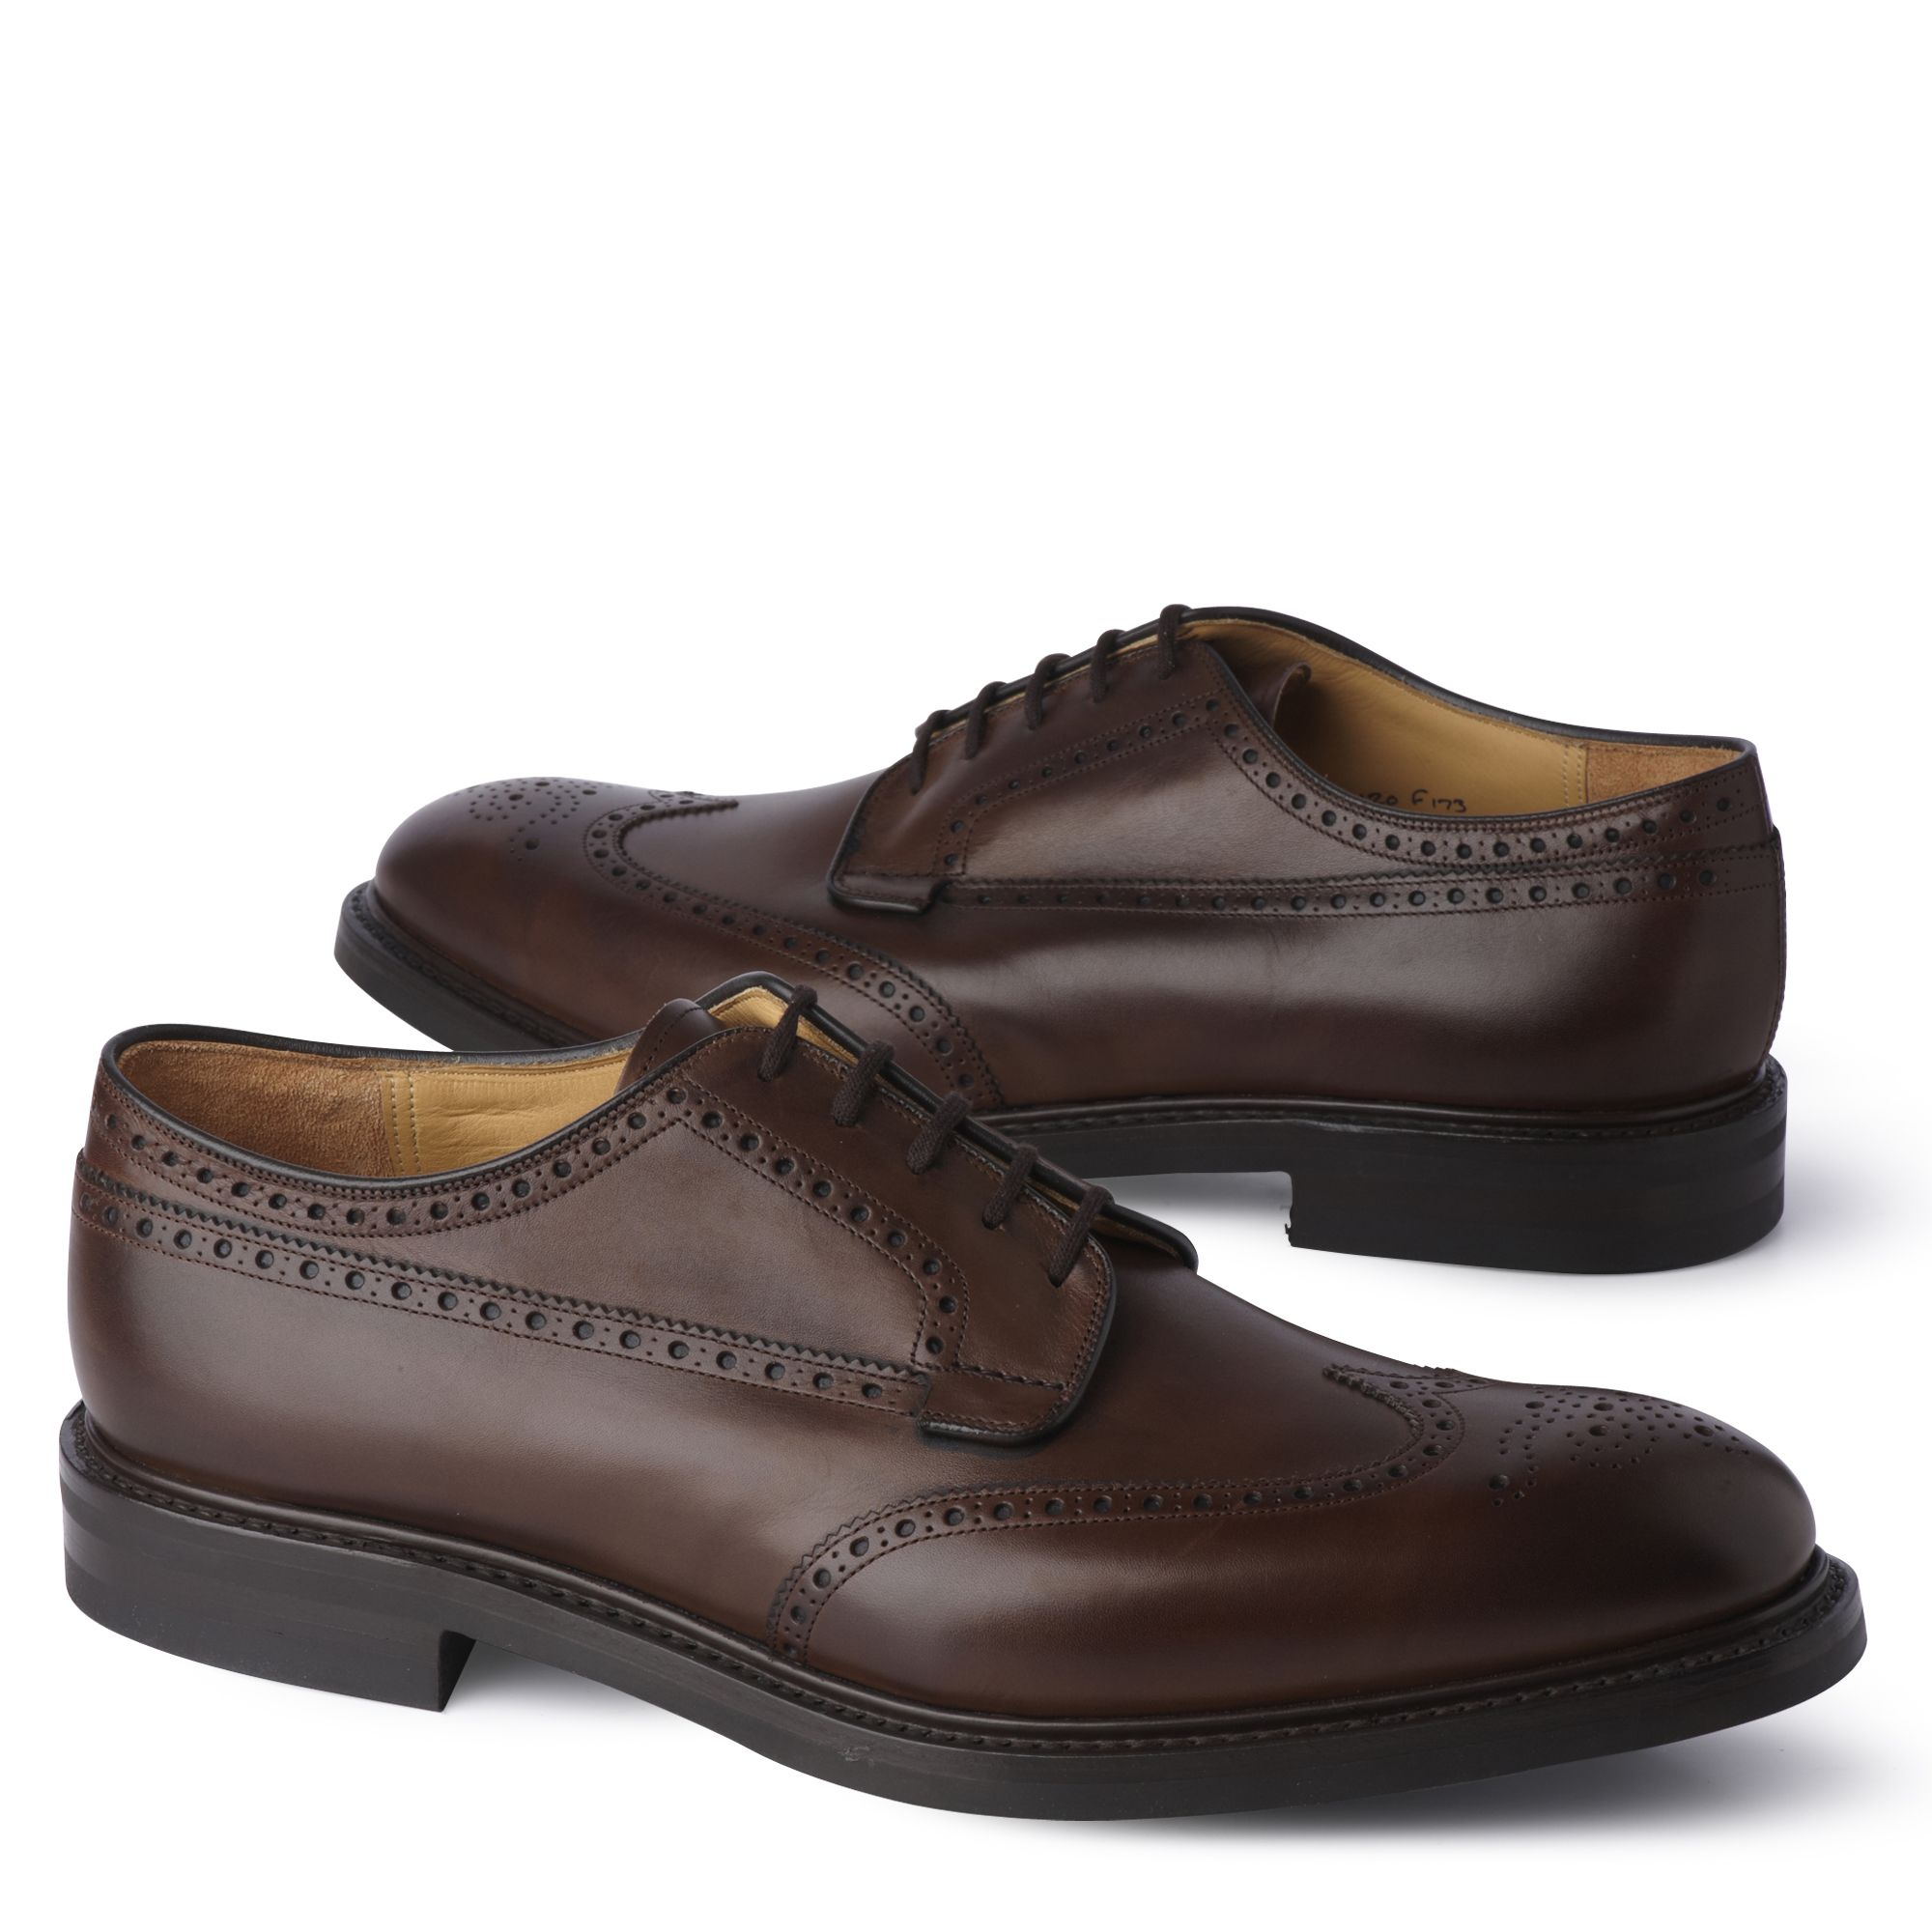 Church's Grafton R Lace–up Derby Shoes in Brown for Men - Lyst